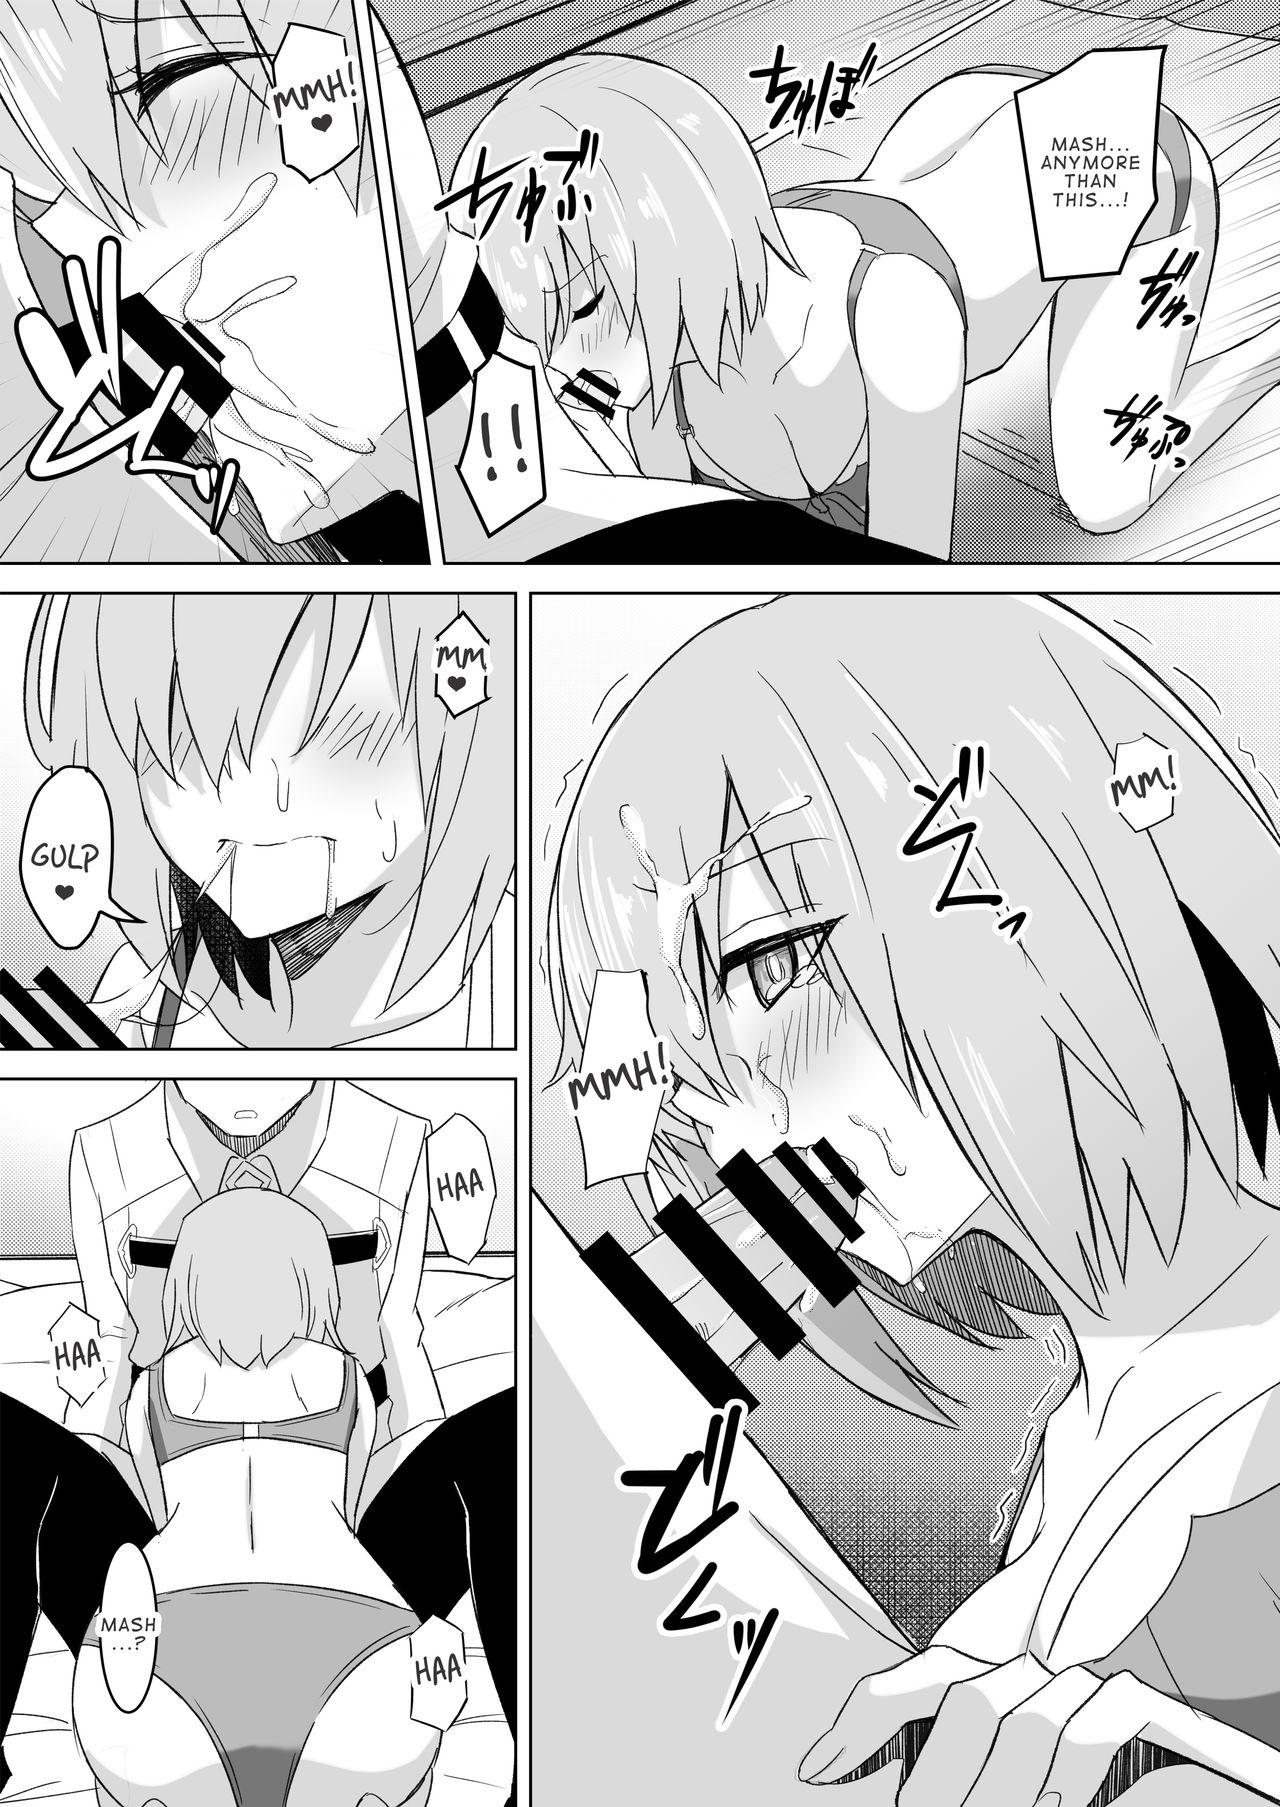 Anal Sex Mash Was Jealousy - Fate grand order Police - Page 8